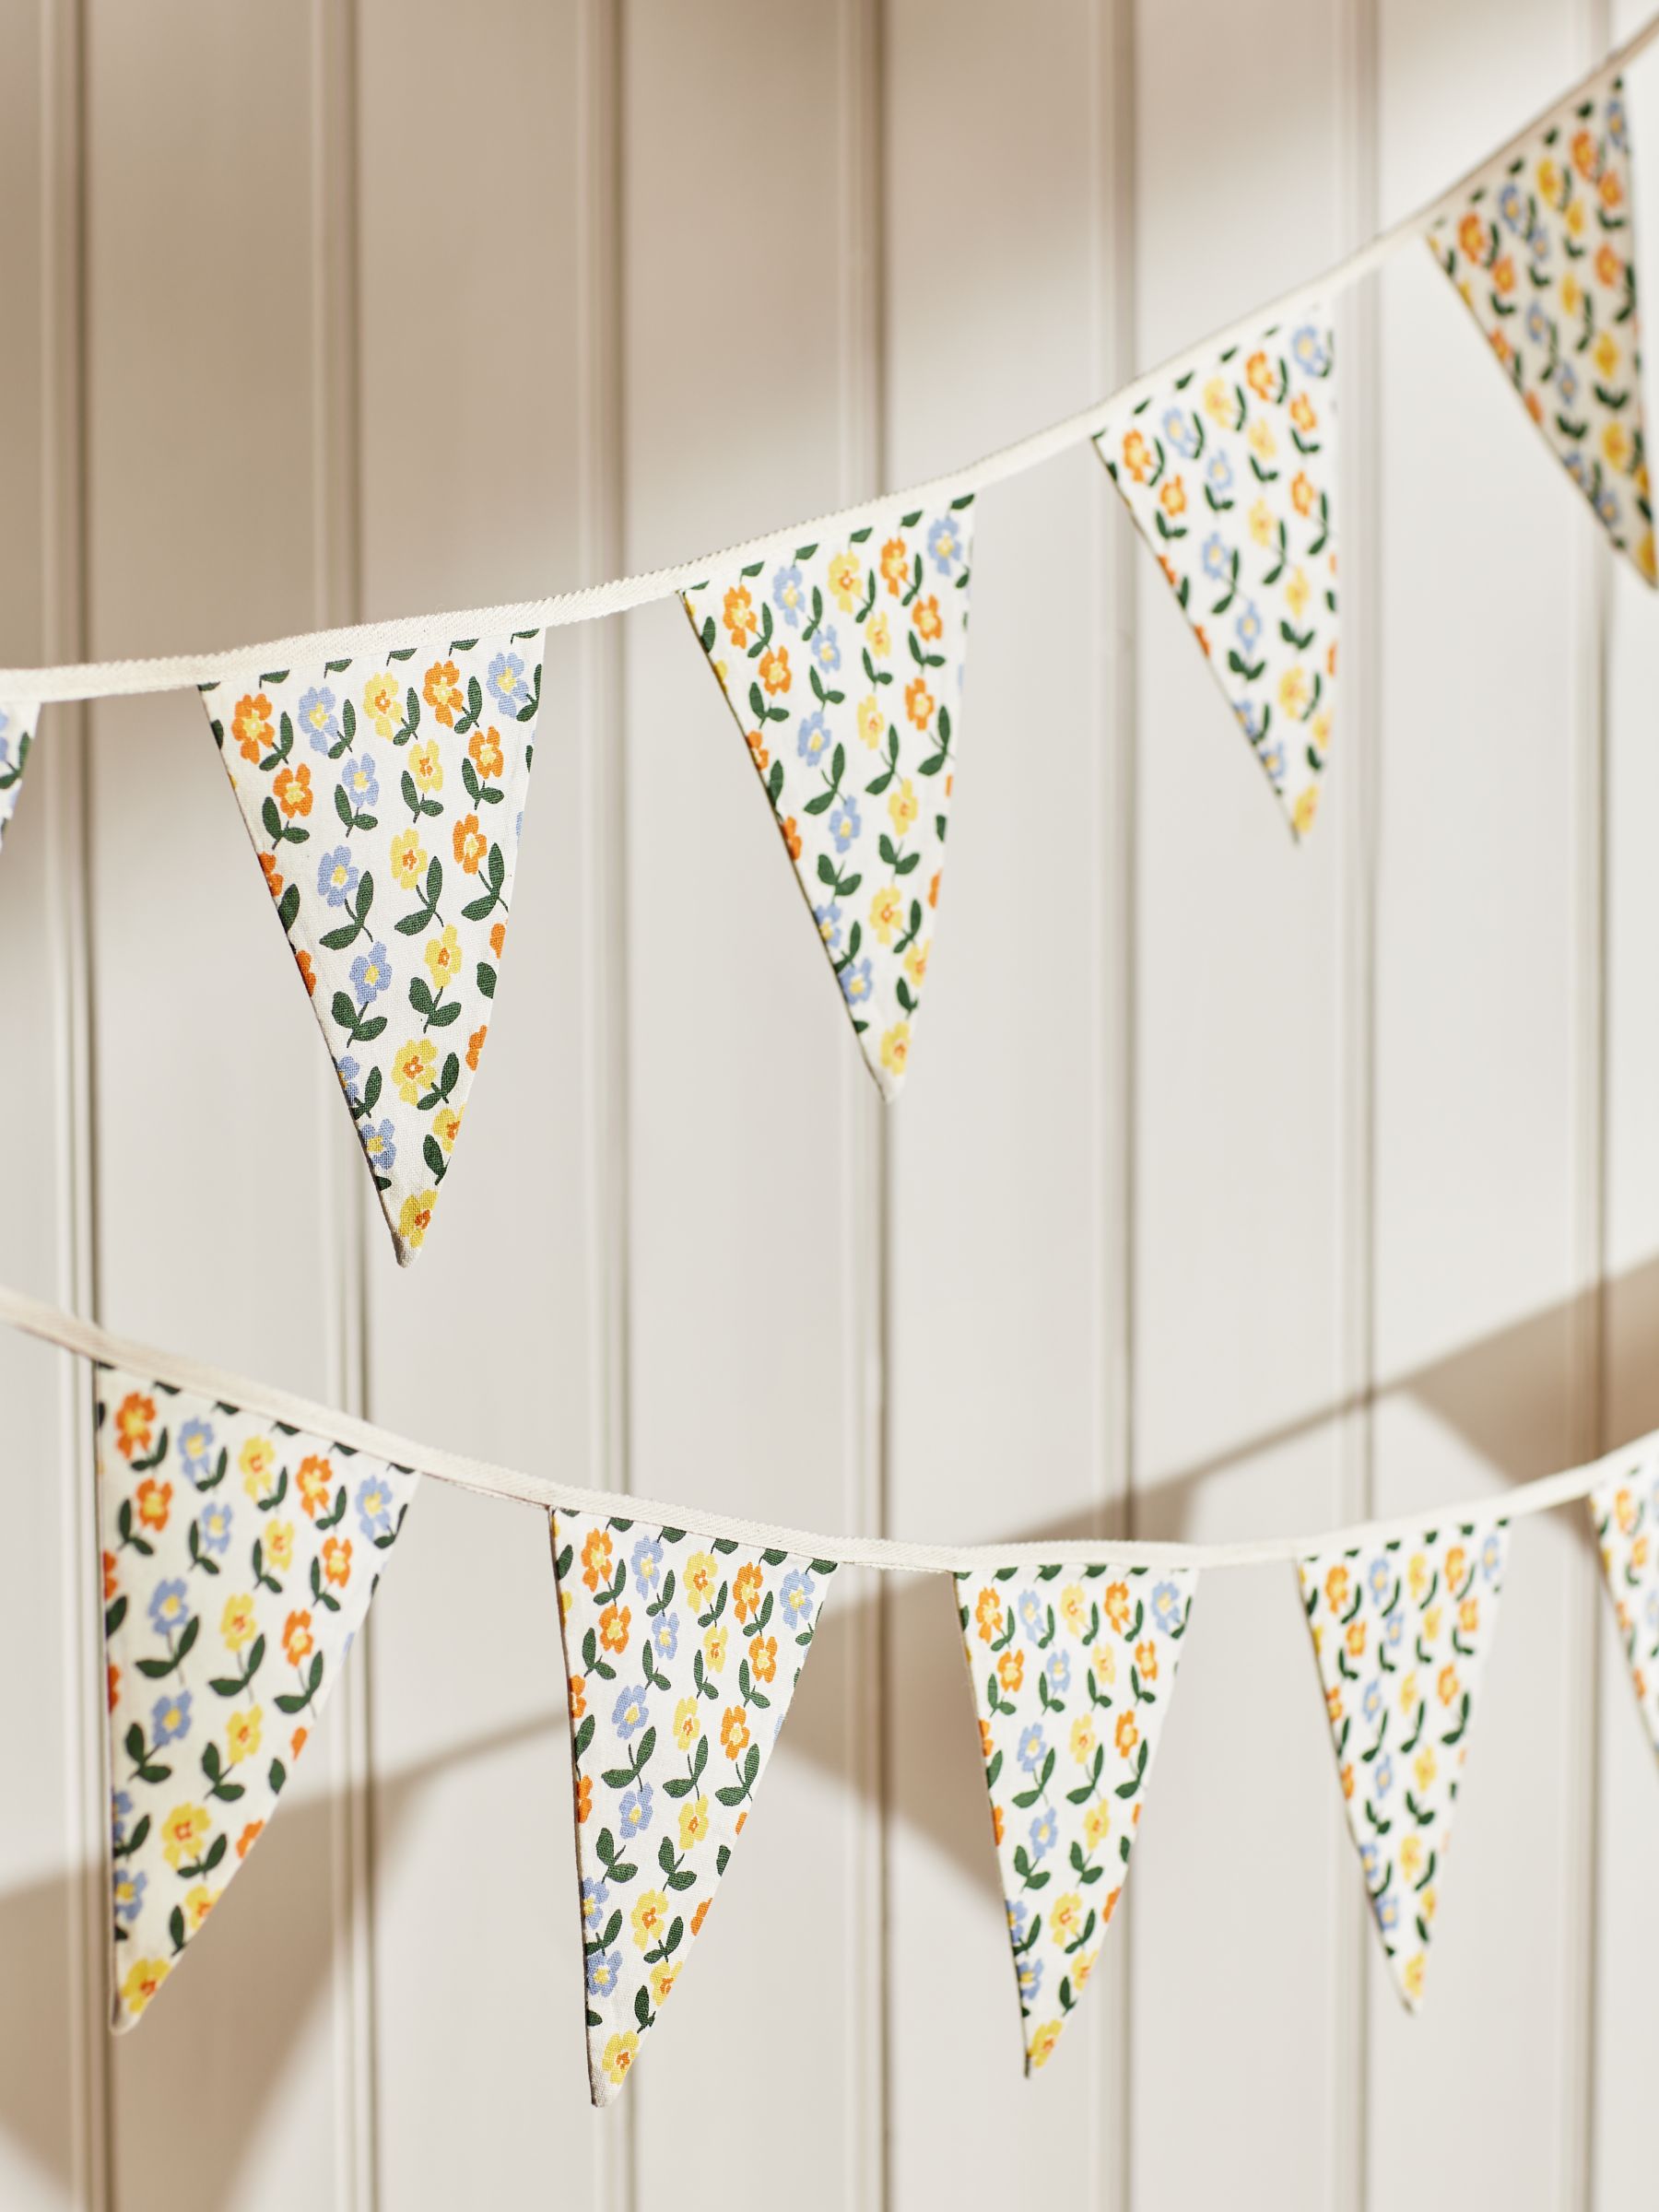 Spring Floral Cotton Bunting, L2m £10.00